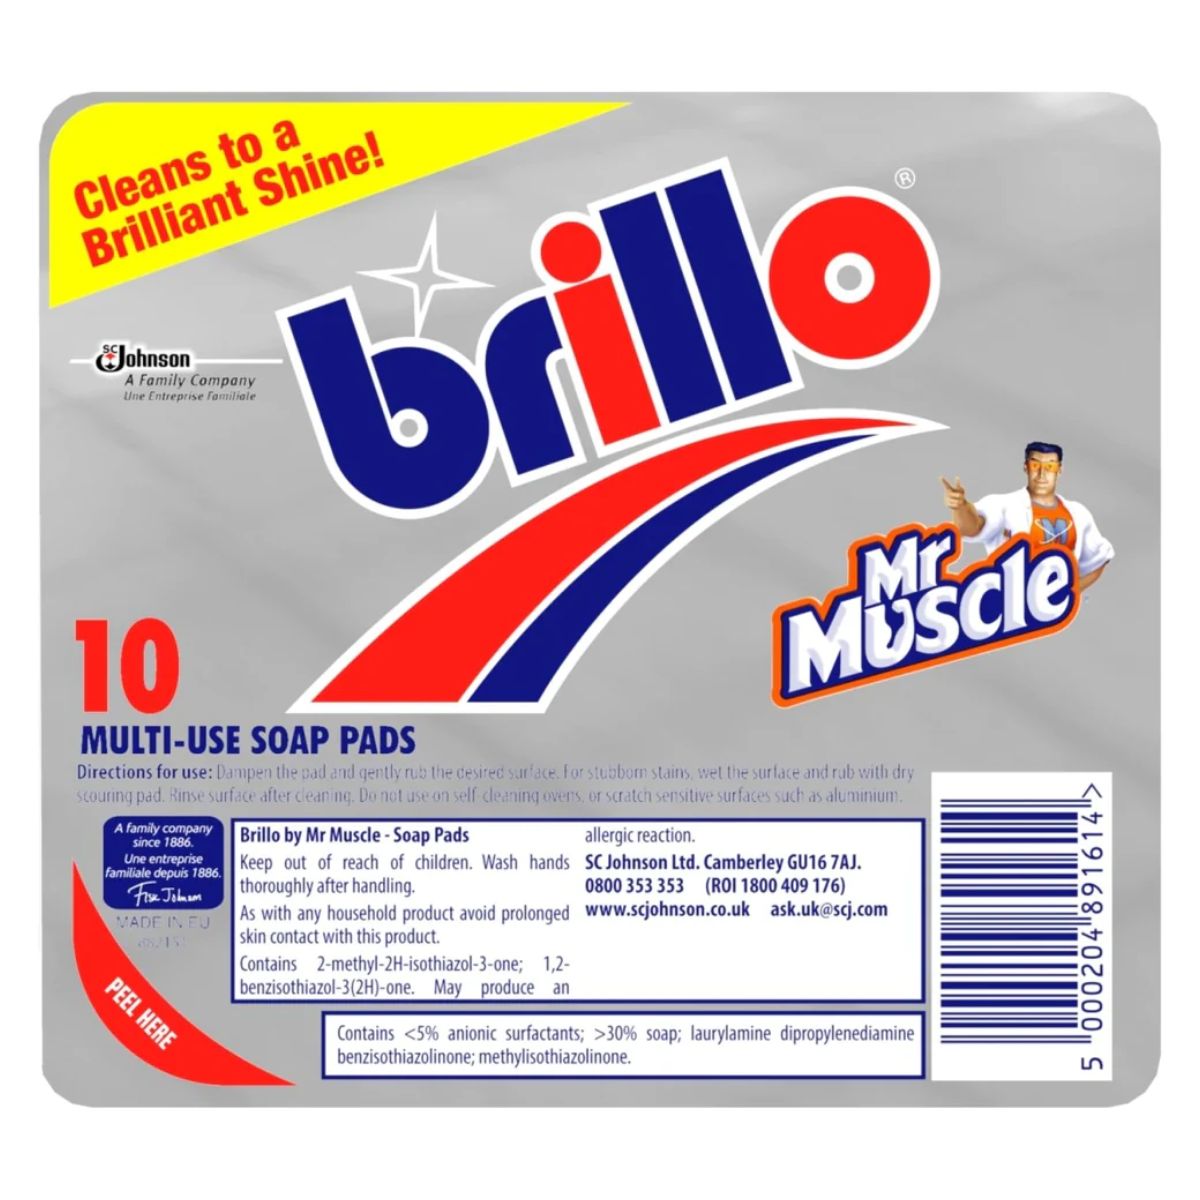 Packaging for Brillo - Soap Pads - 10pcs with Mr. Muscle branding, highlighting the product's cleaning capabilities and containing 10 pads.